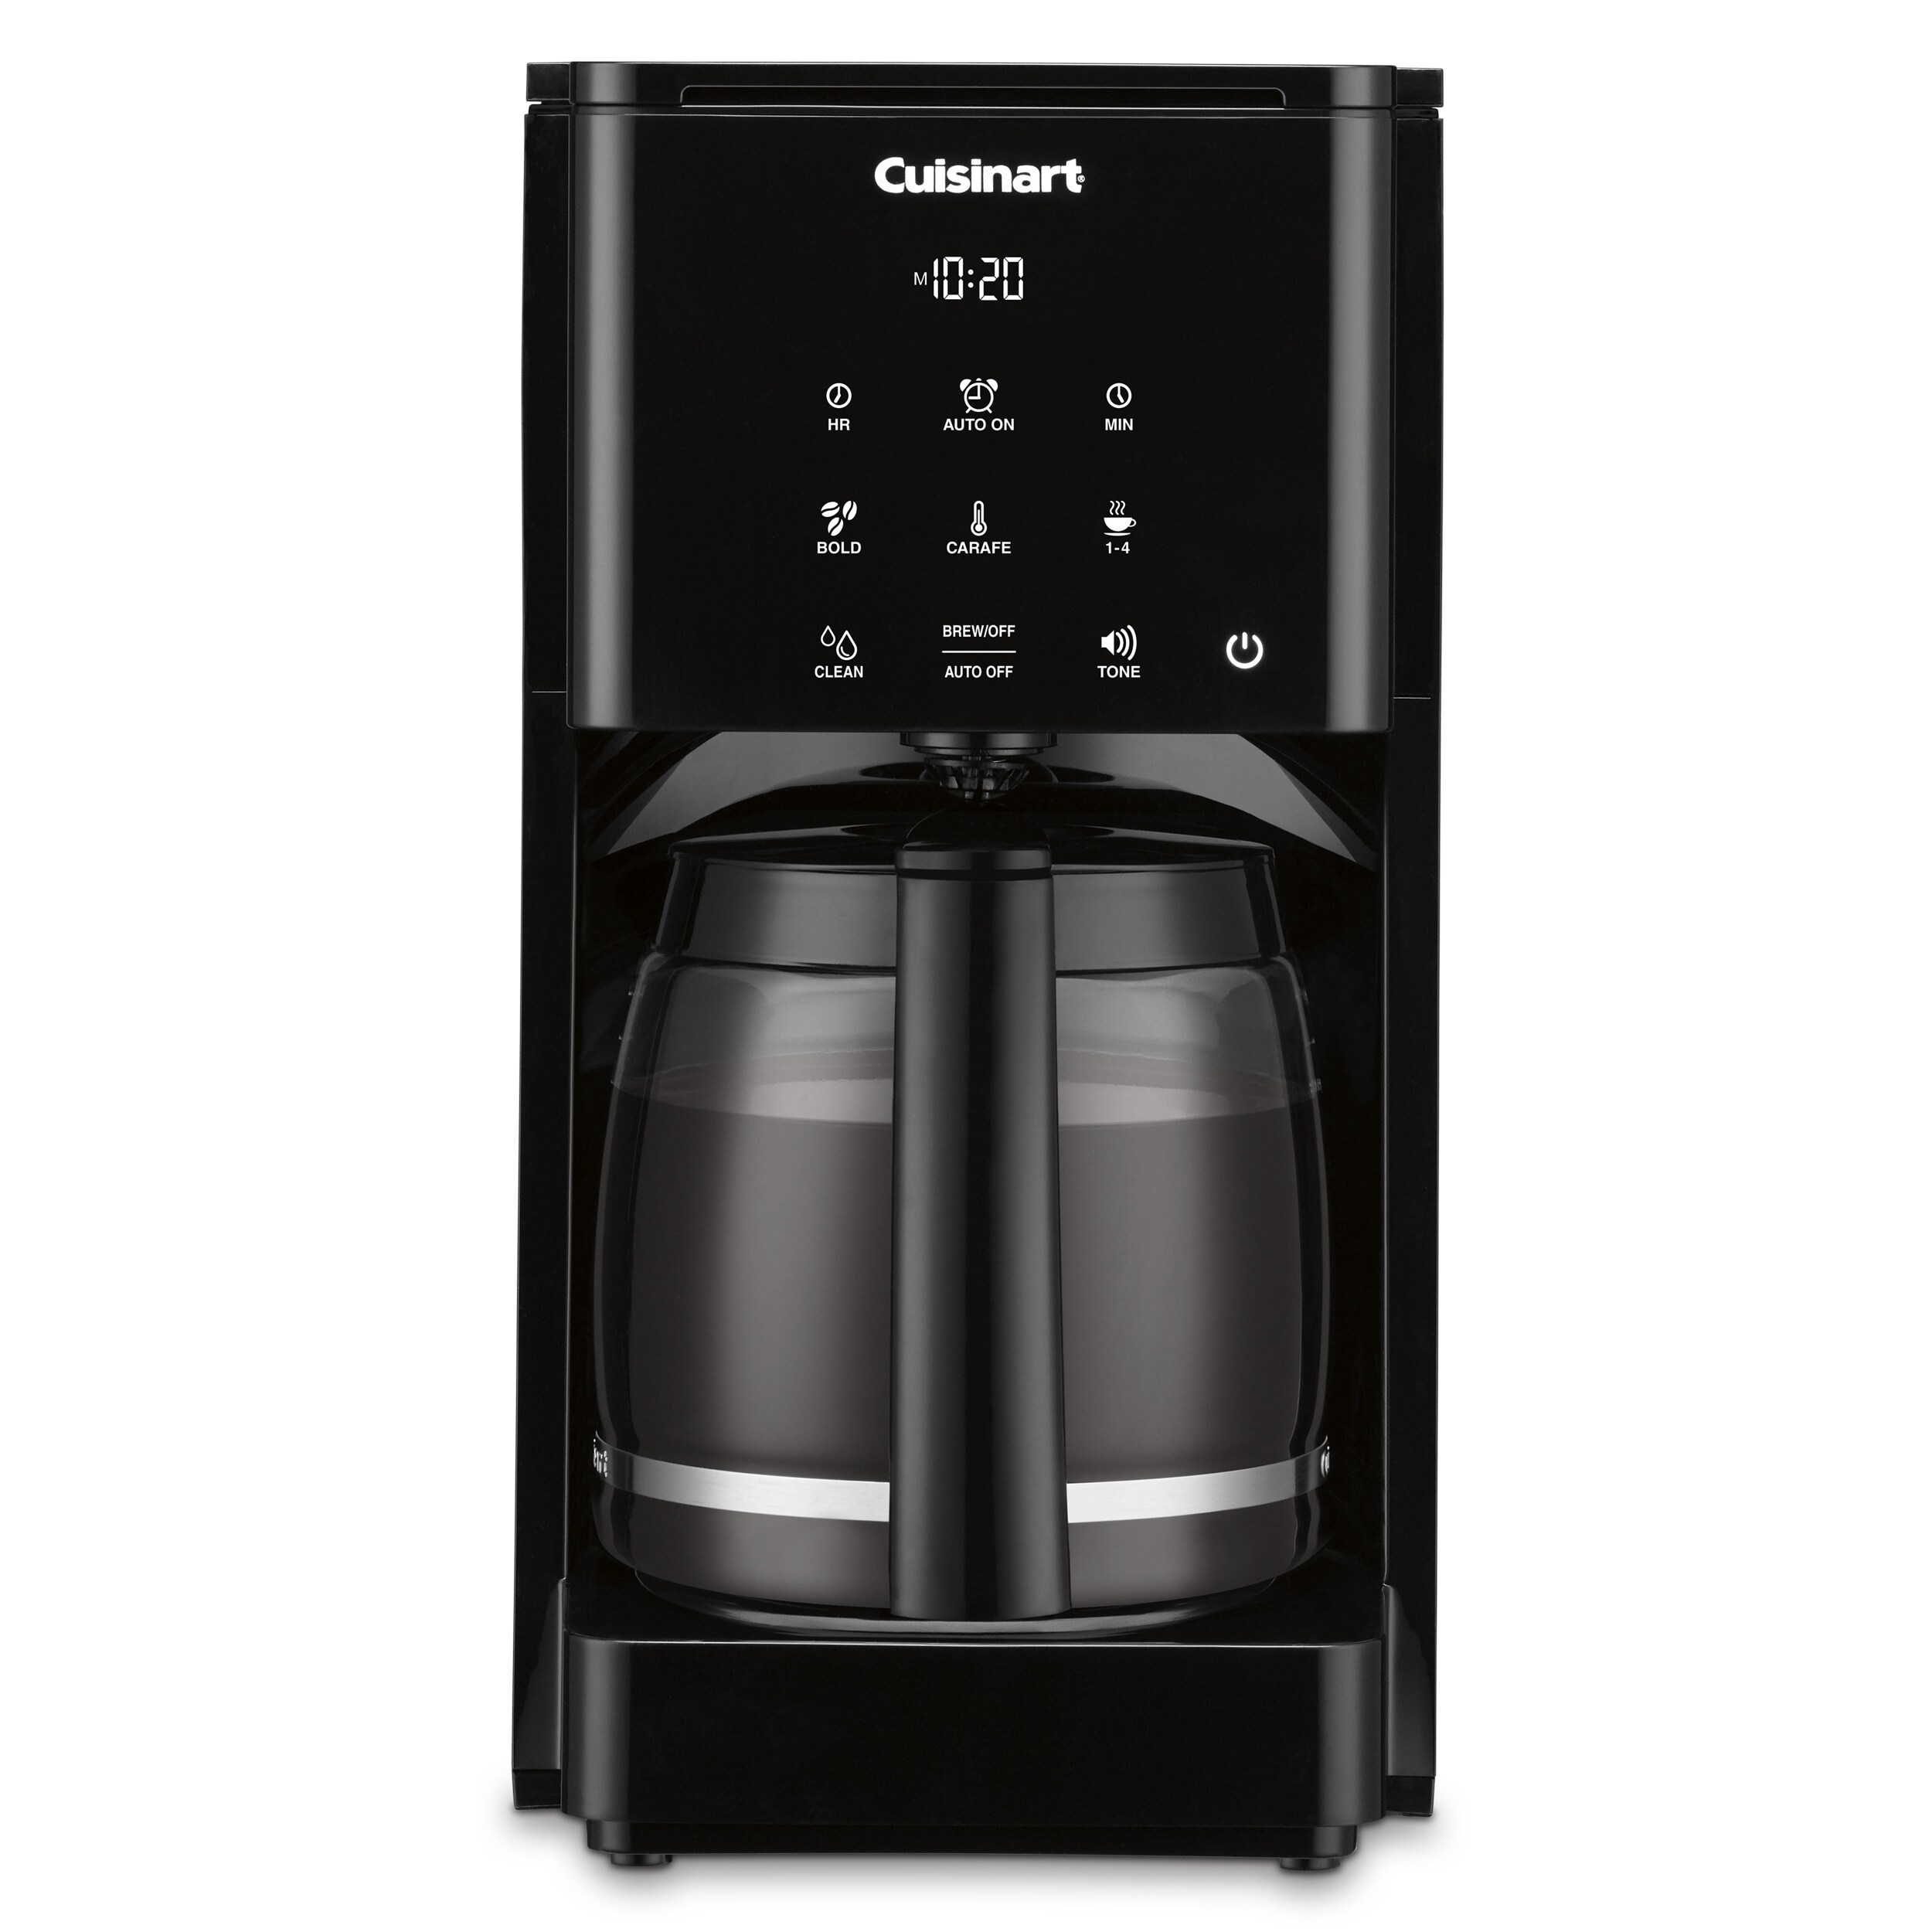 Cuisinart Cold Brew Automatic Coffee Maker DCB-10P1